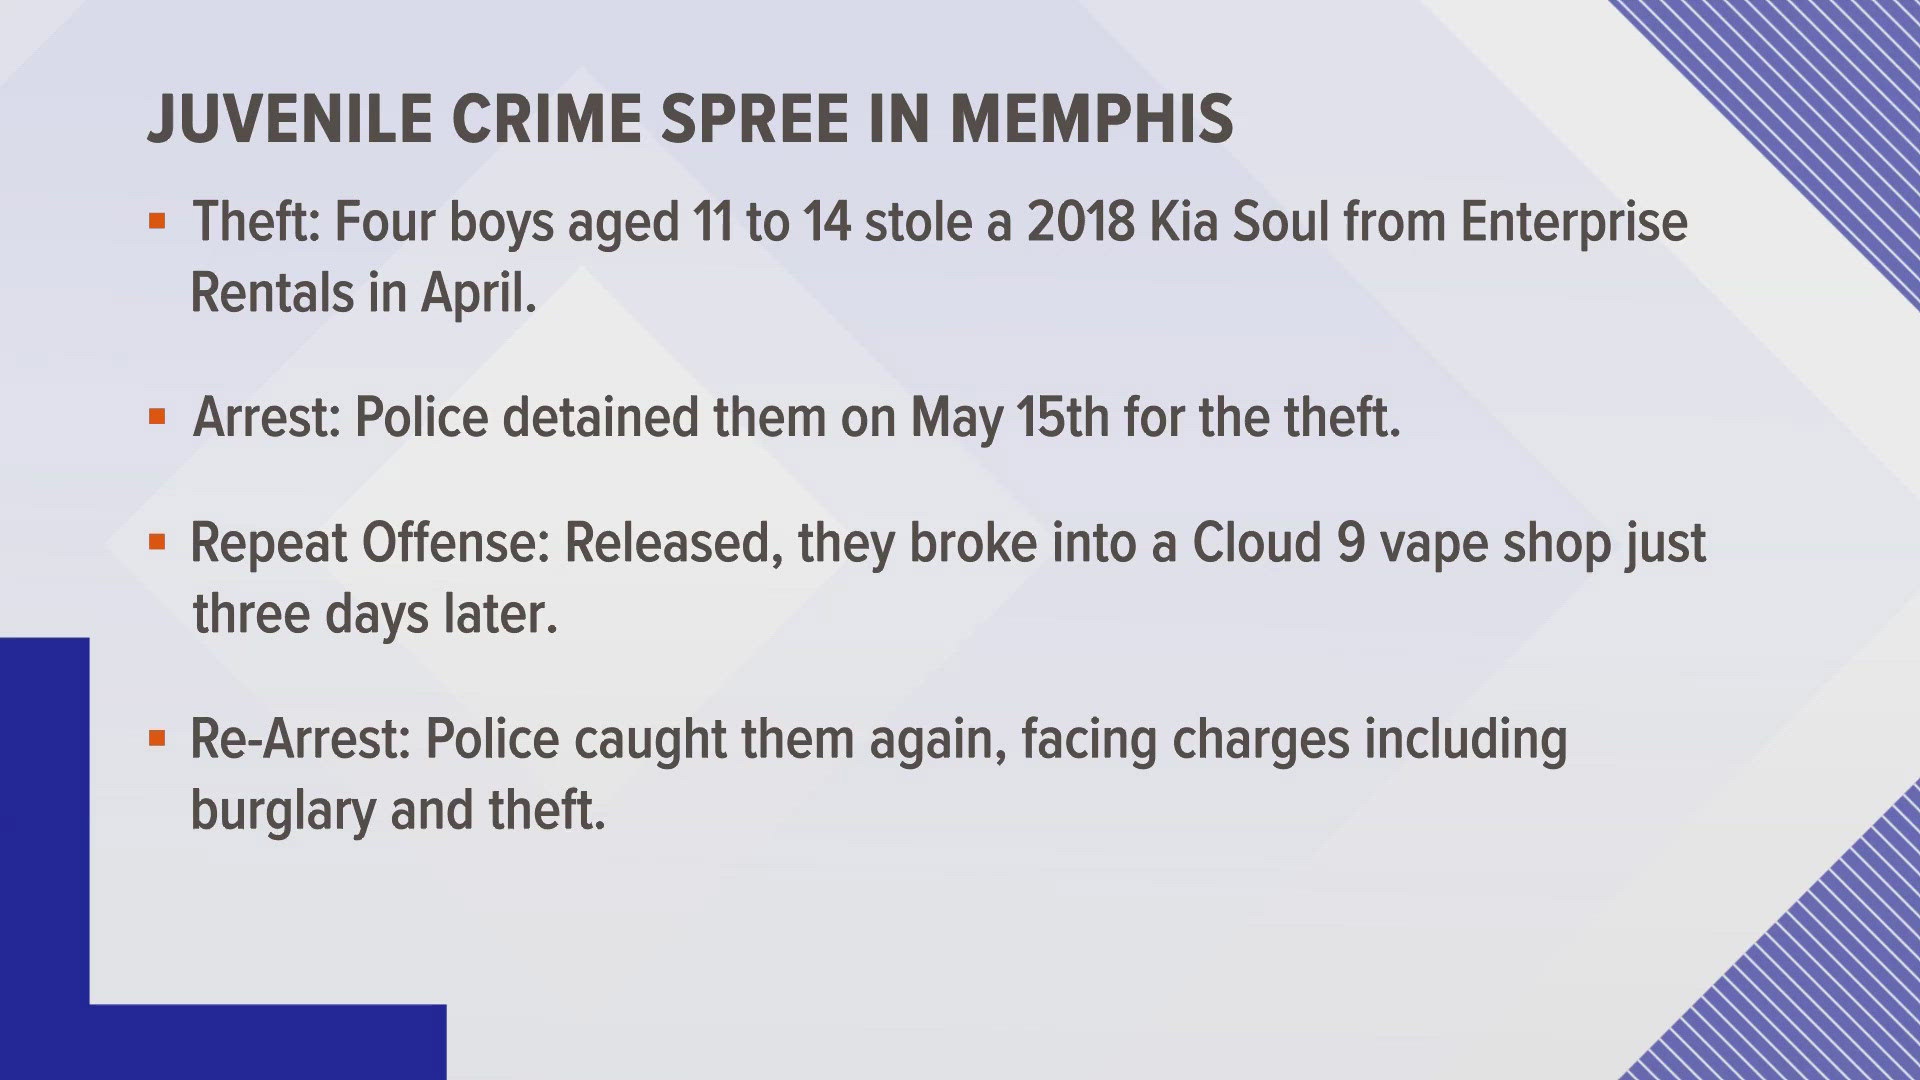 Memphis Police said four boys ages 11 to 14 have been arrested and charged in a series of crimes.